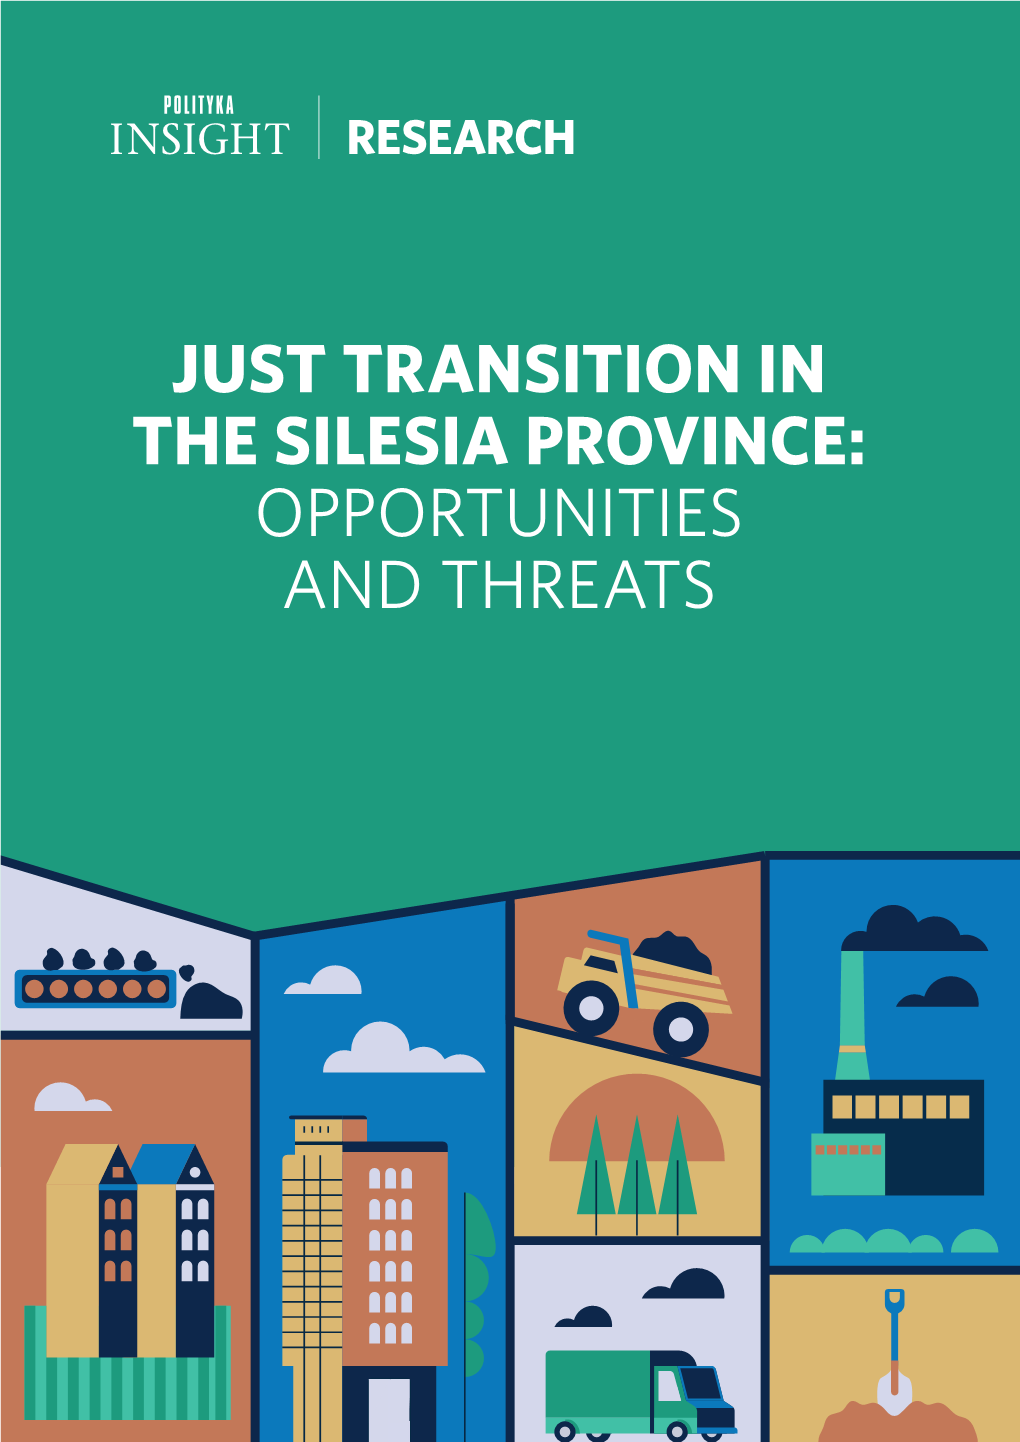 JUST TRANSITION in the SILESIA PROVINCE: OPPORTUNITIES and THREATS AUTHOR Miłosz Wiatrowski